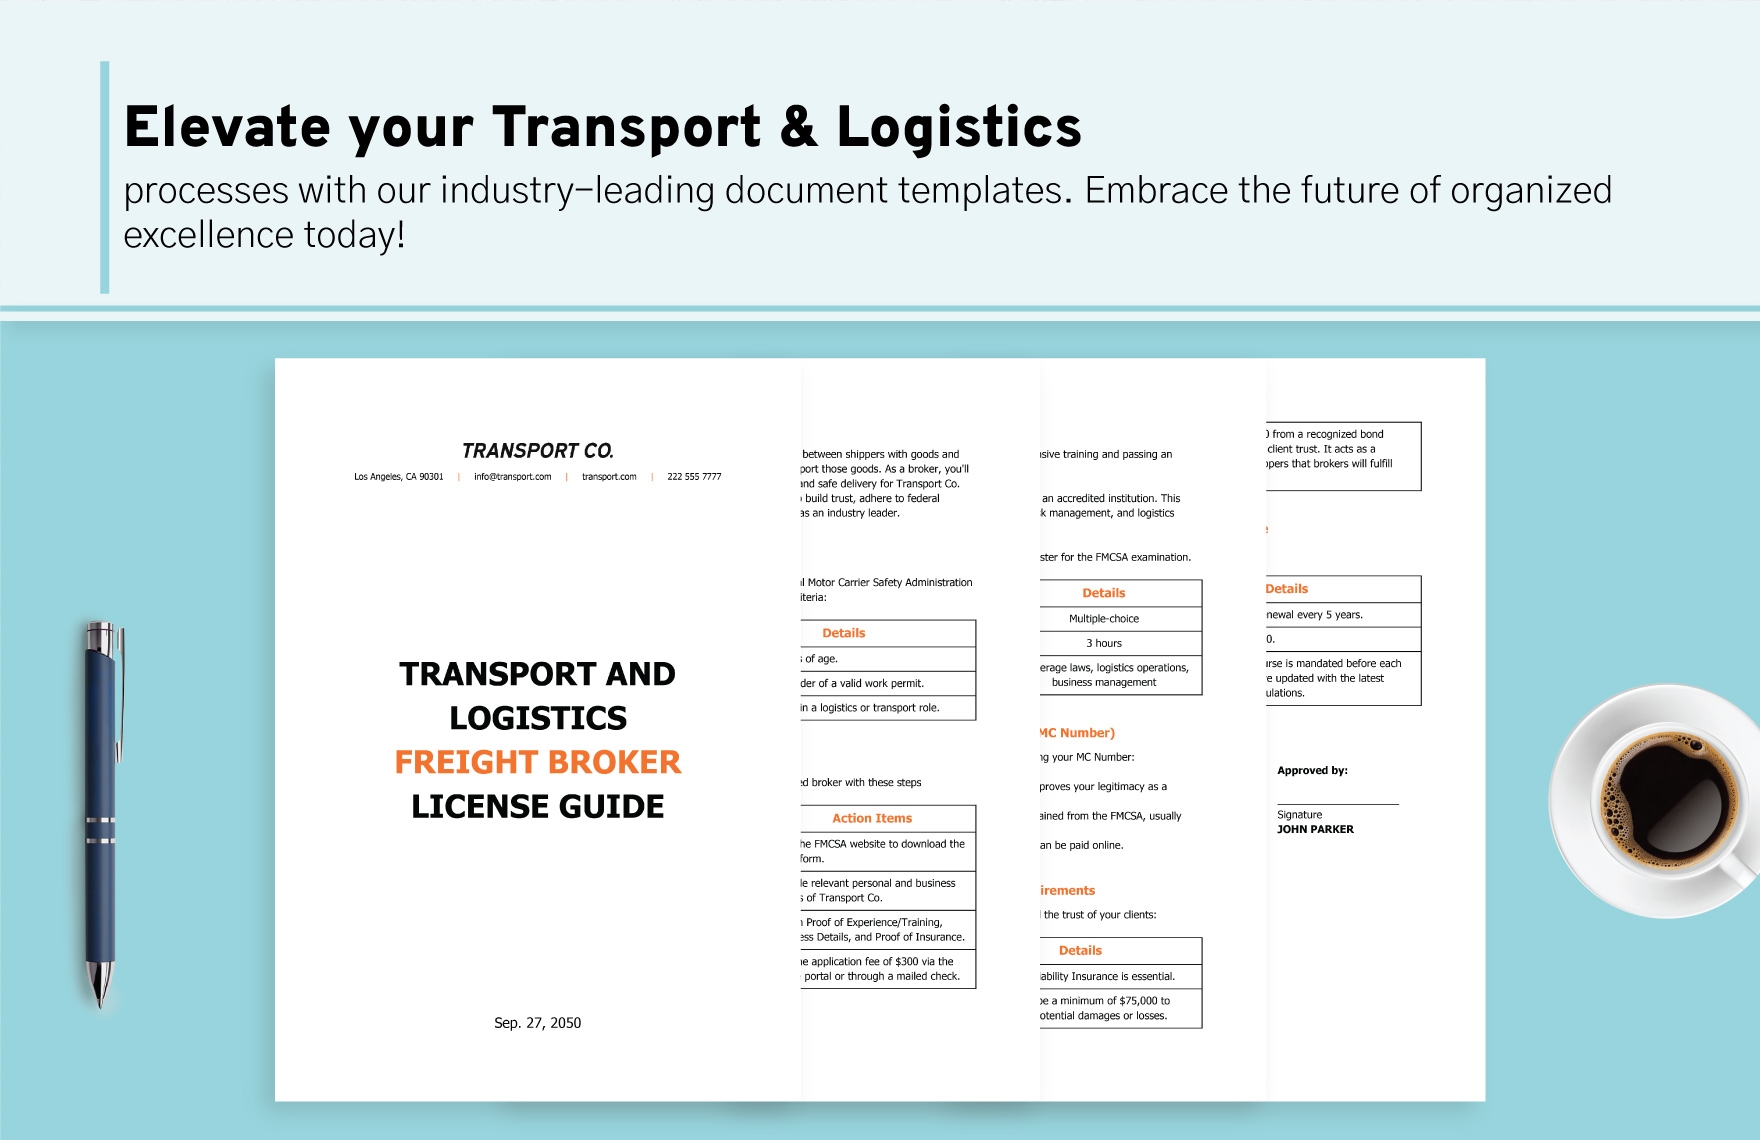 Transport and Logistics Freight Broker License Guide Template